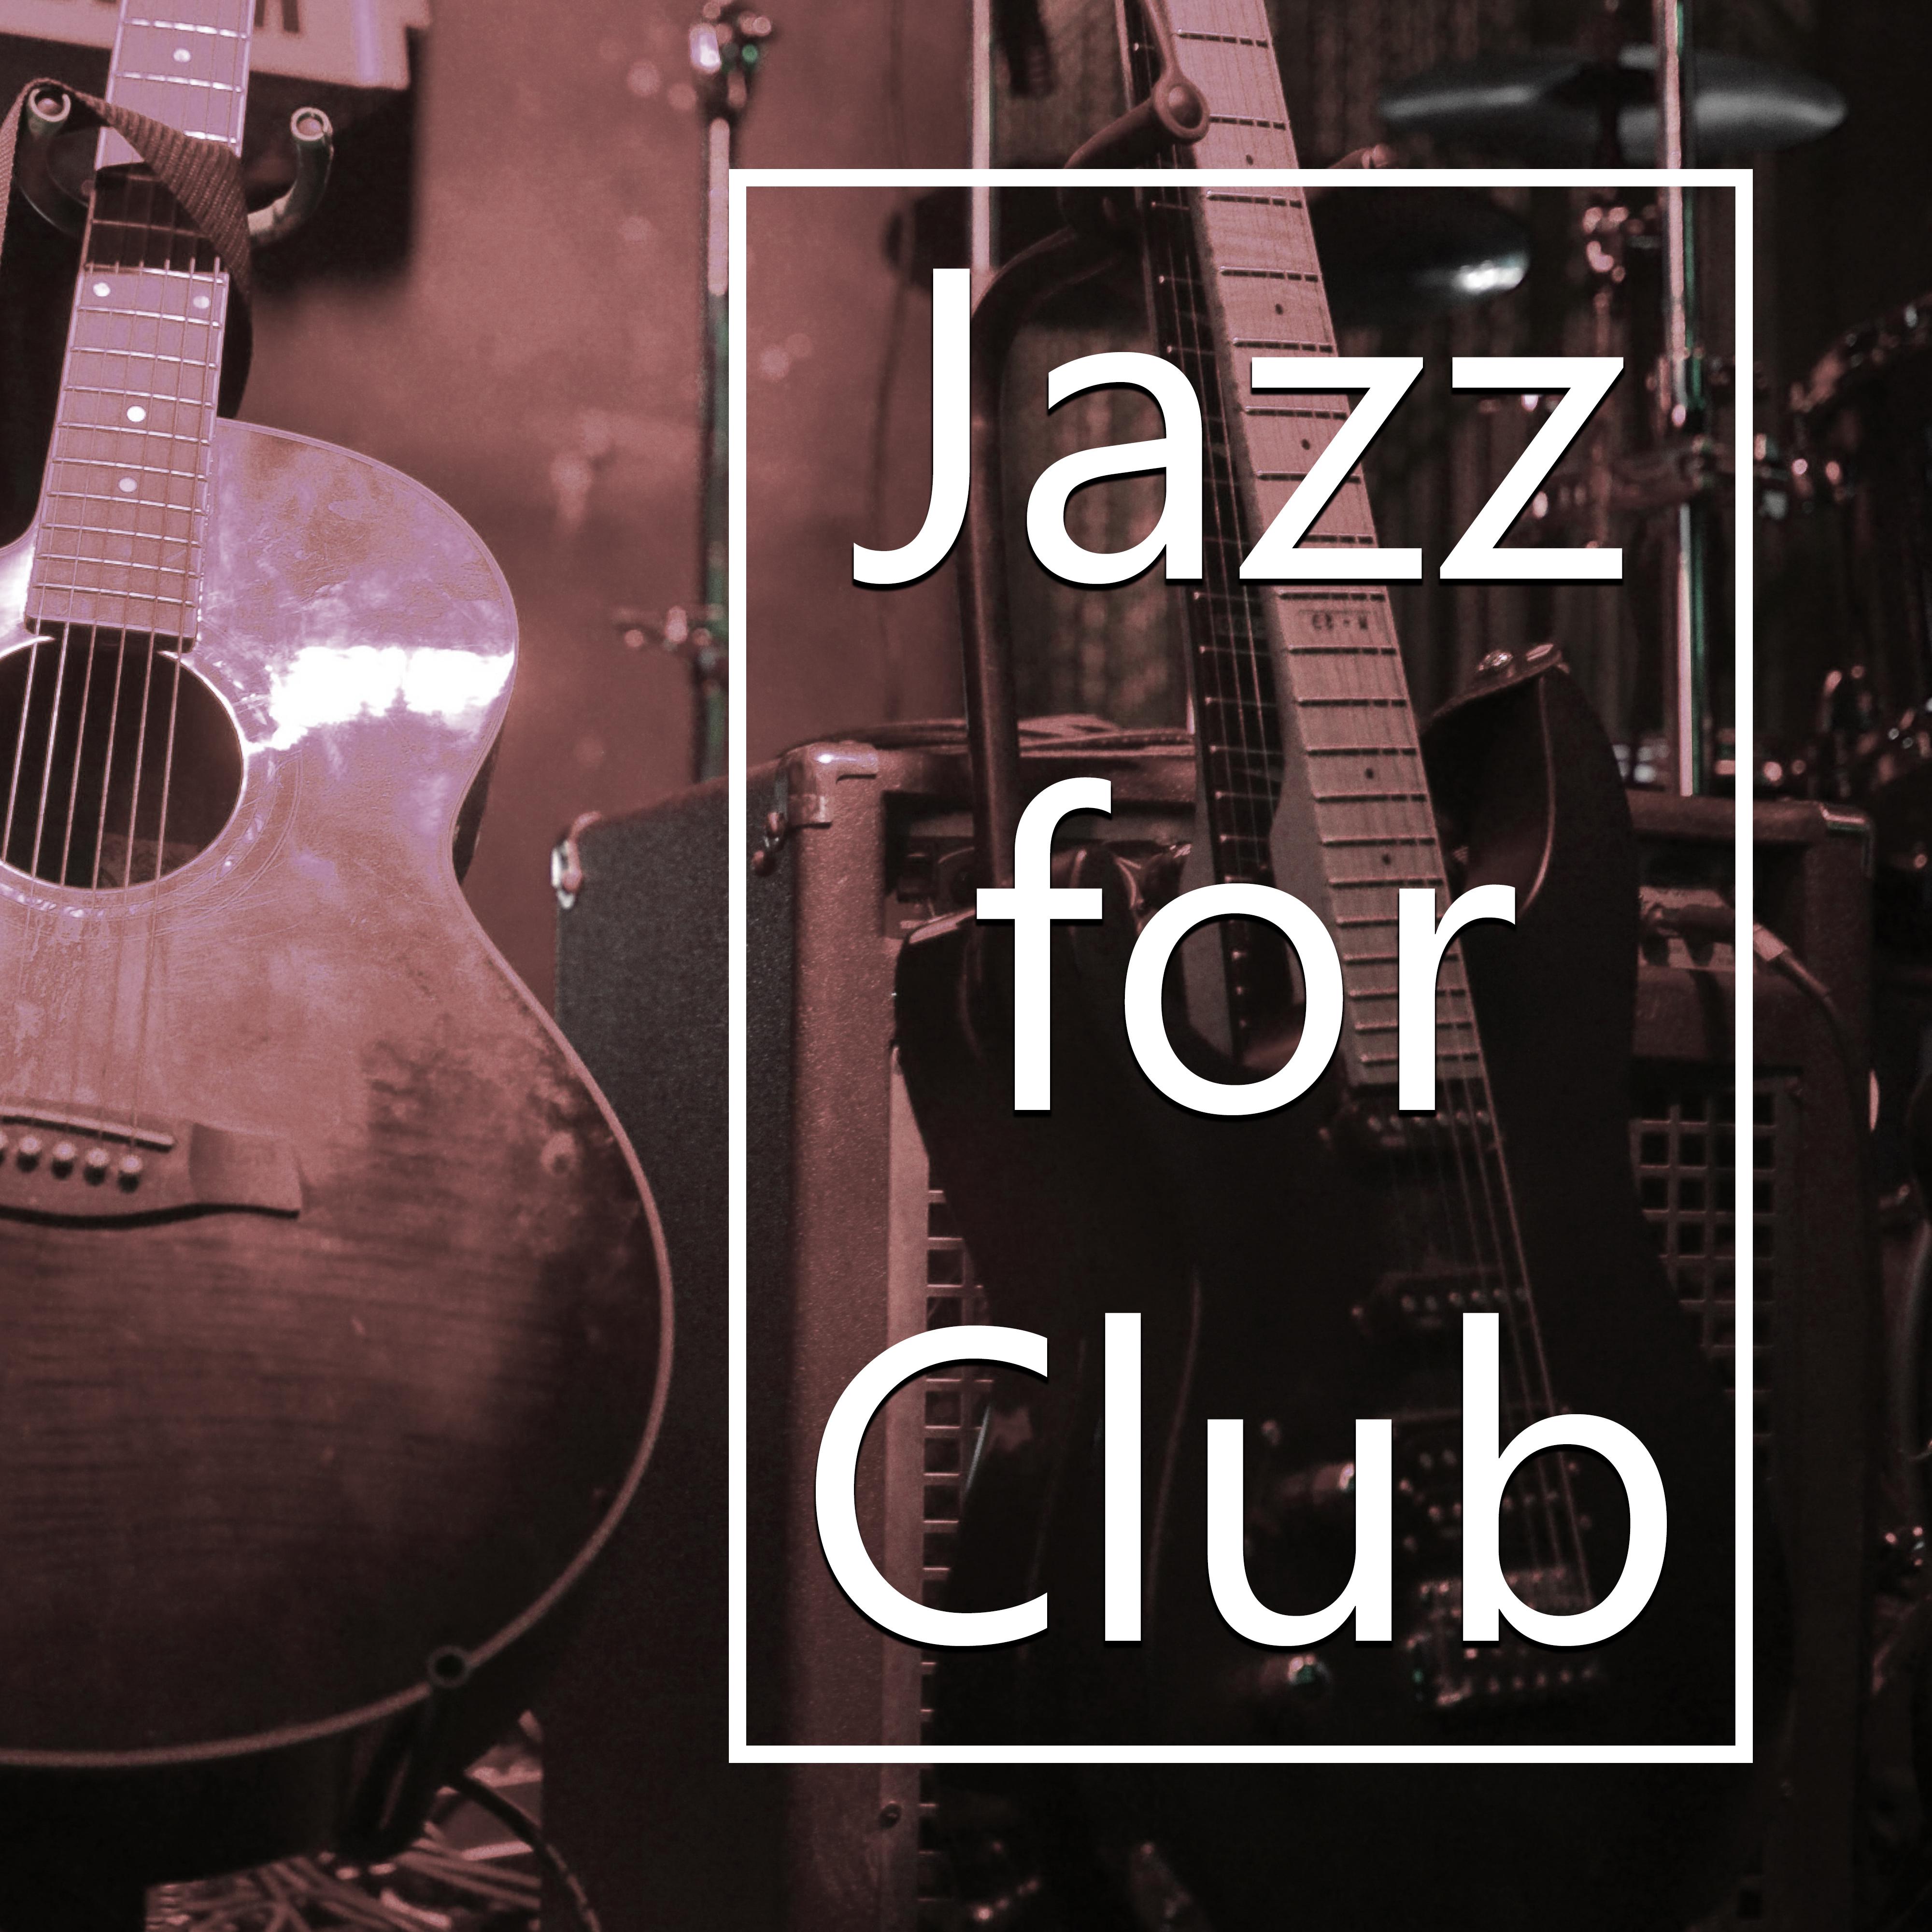 Jazz for Club – Calm Down, Evening Relaxation, Jazz Night, Smooth Sounds, Music to Rest